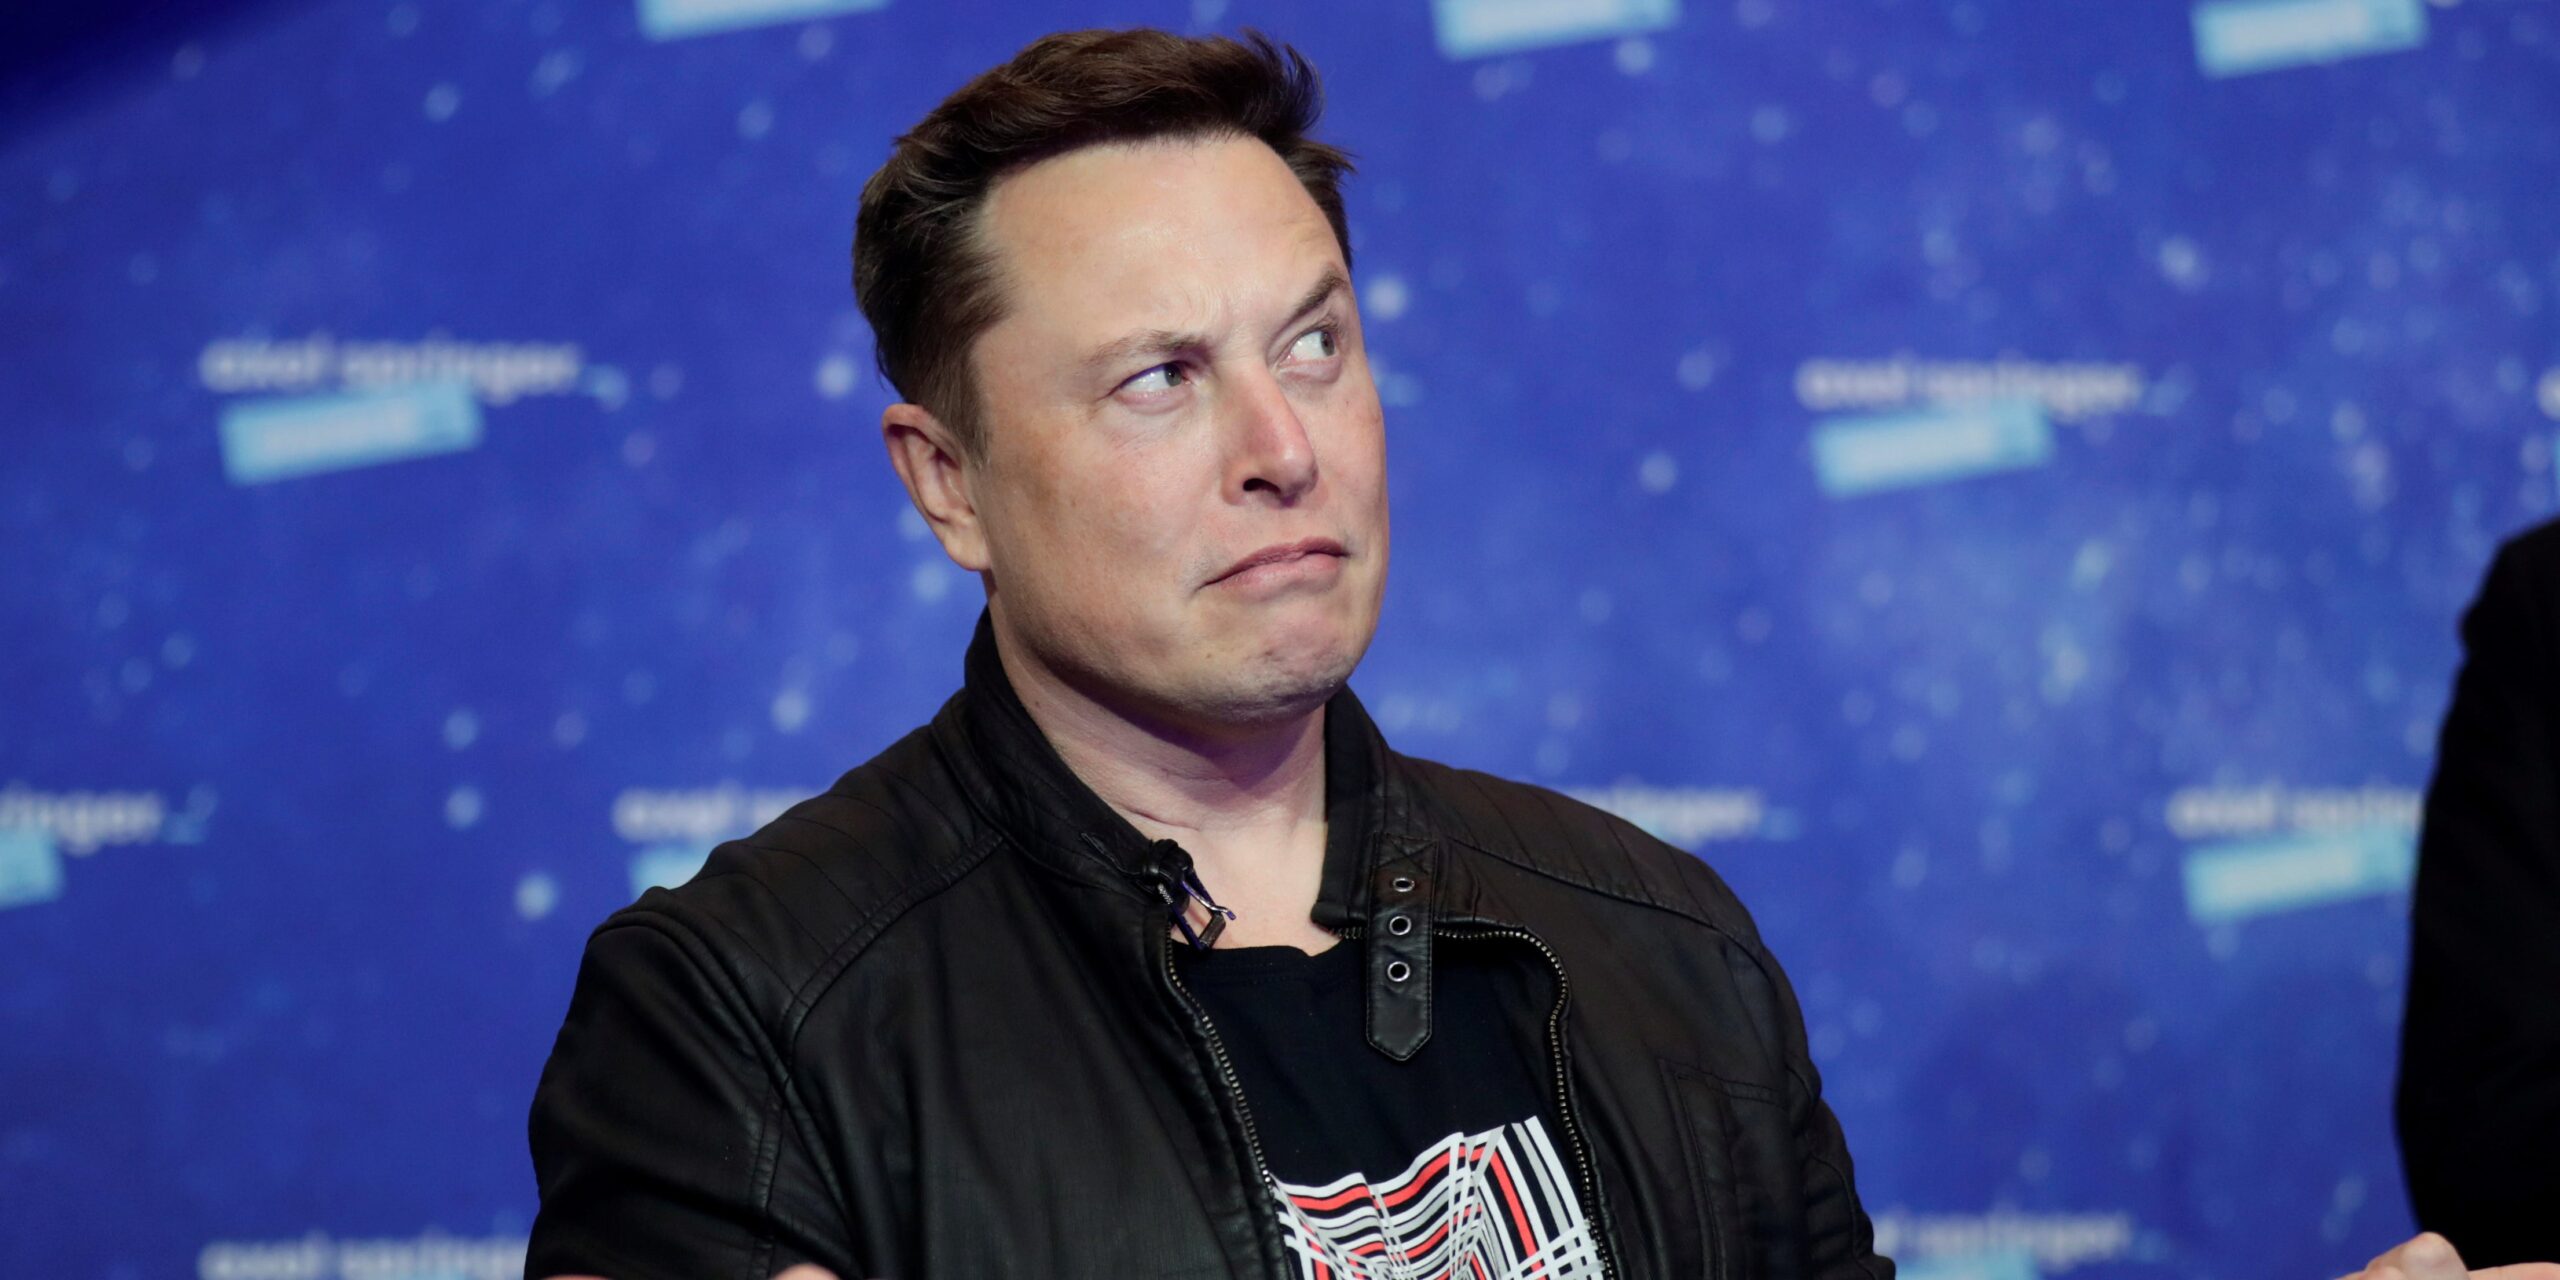 Elon Musk tells his 44.8 million Twitter followers he’s stepping away from the platform ‘for a while’